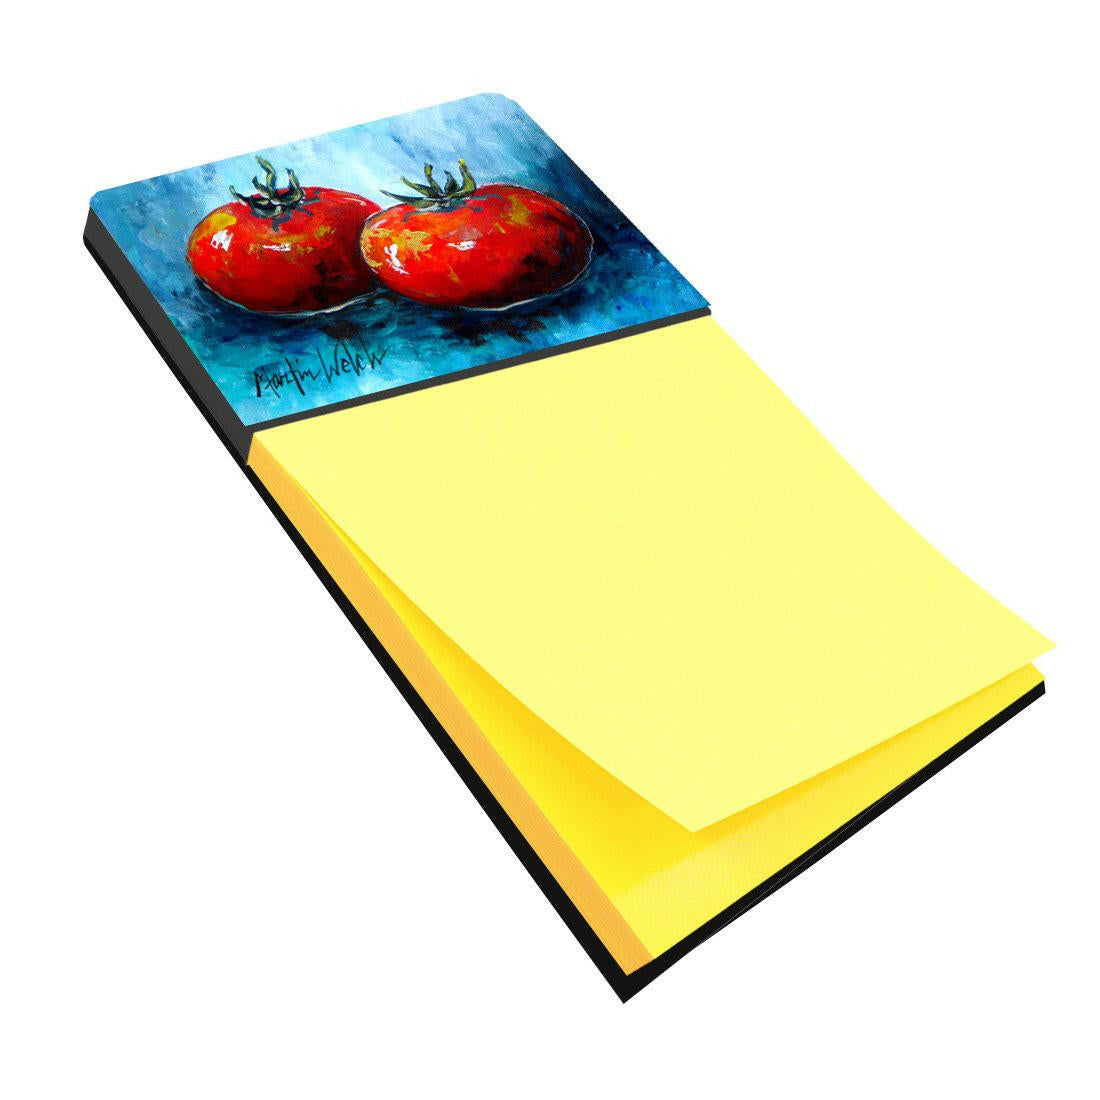 Vegetables - Tomatoes Red Toes Refiillable Sticky Note Holder or Postit Note Dispenser MW1088SN by Caroline's Treasures